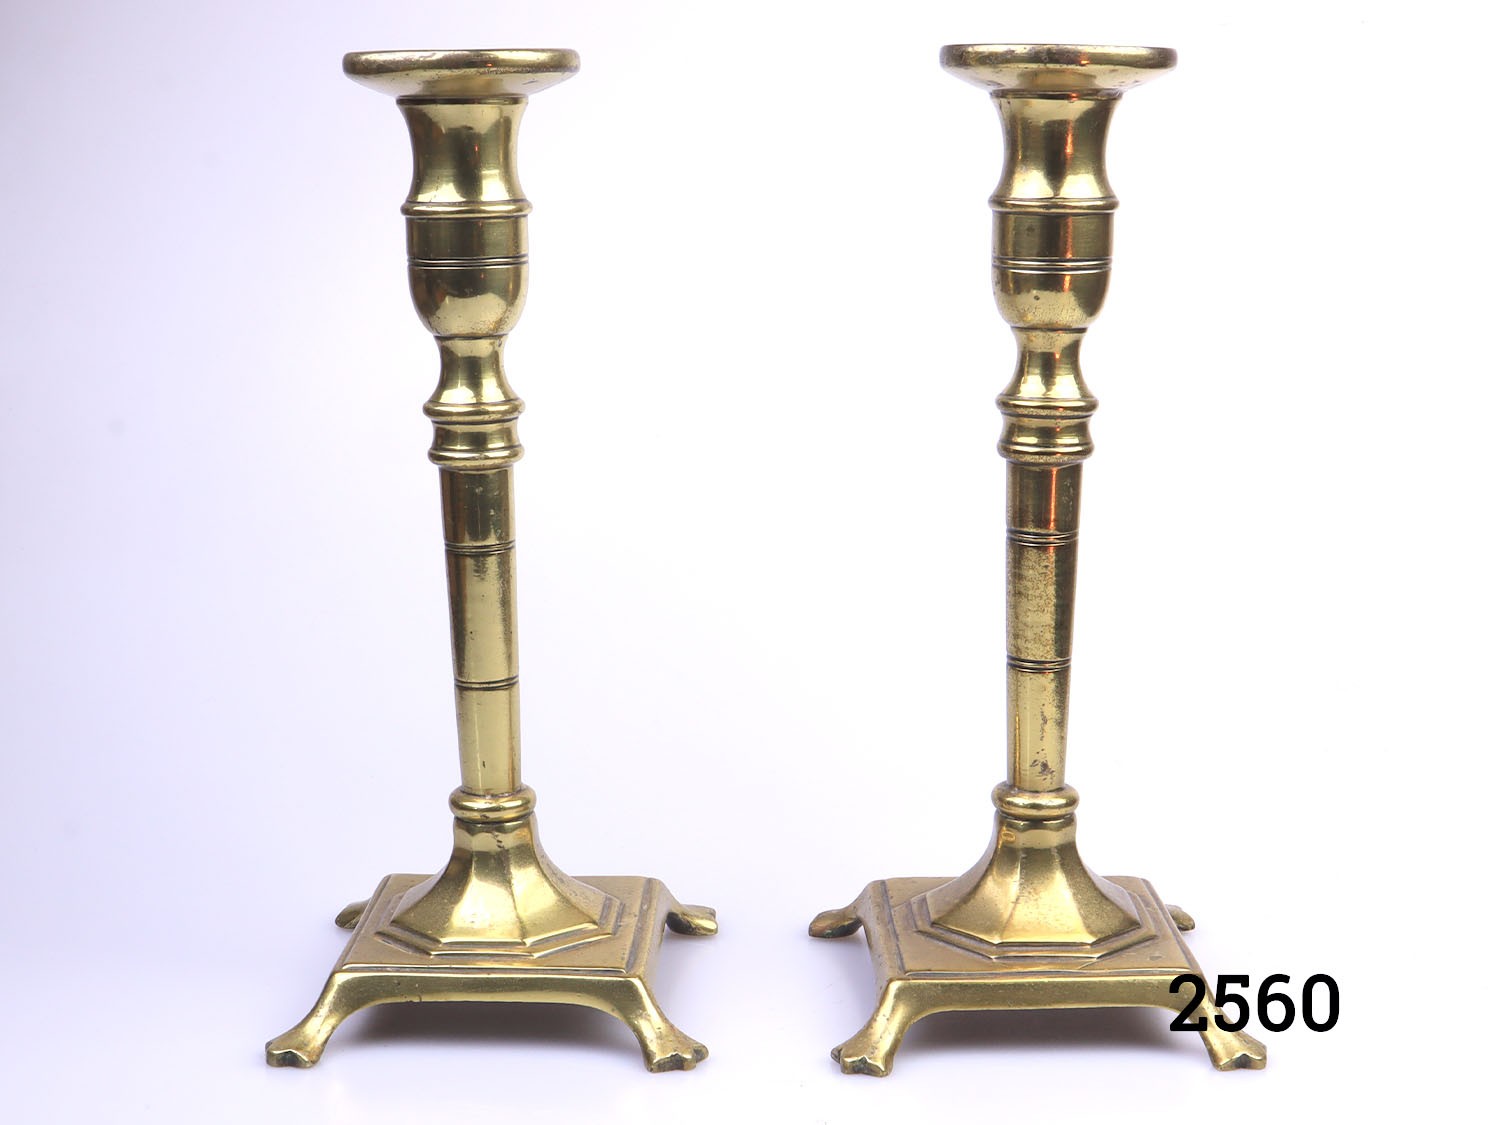 Antique pair of brass candlesticks. Each with square footed bases. c1900-c1920. Each candlestick measures 105mm square at base. Main photo of both candlesticks standing side by side